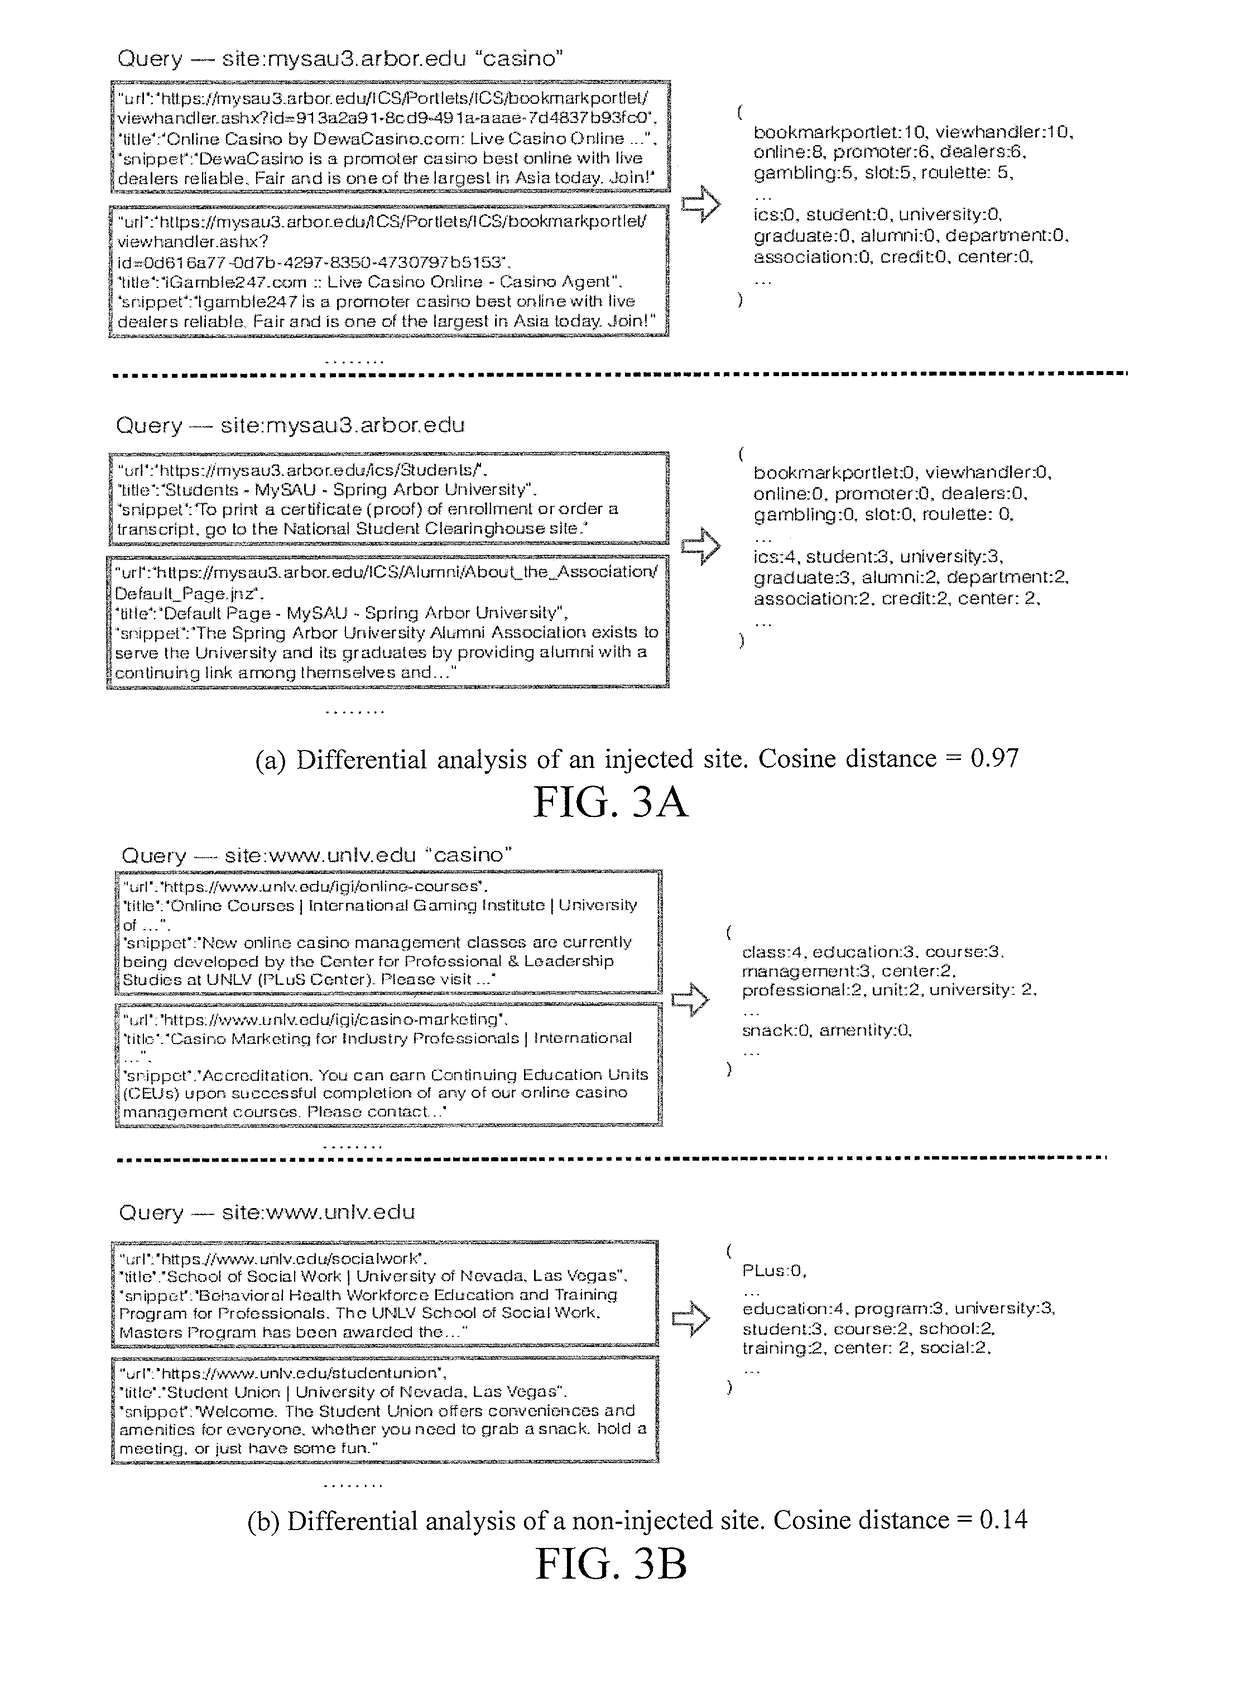 Systems and methods for detection of infected websites